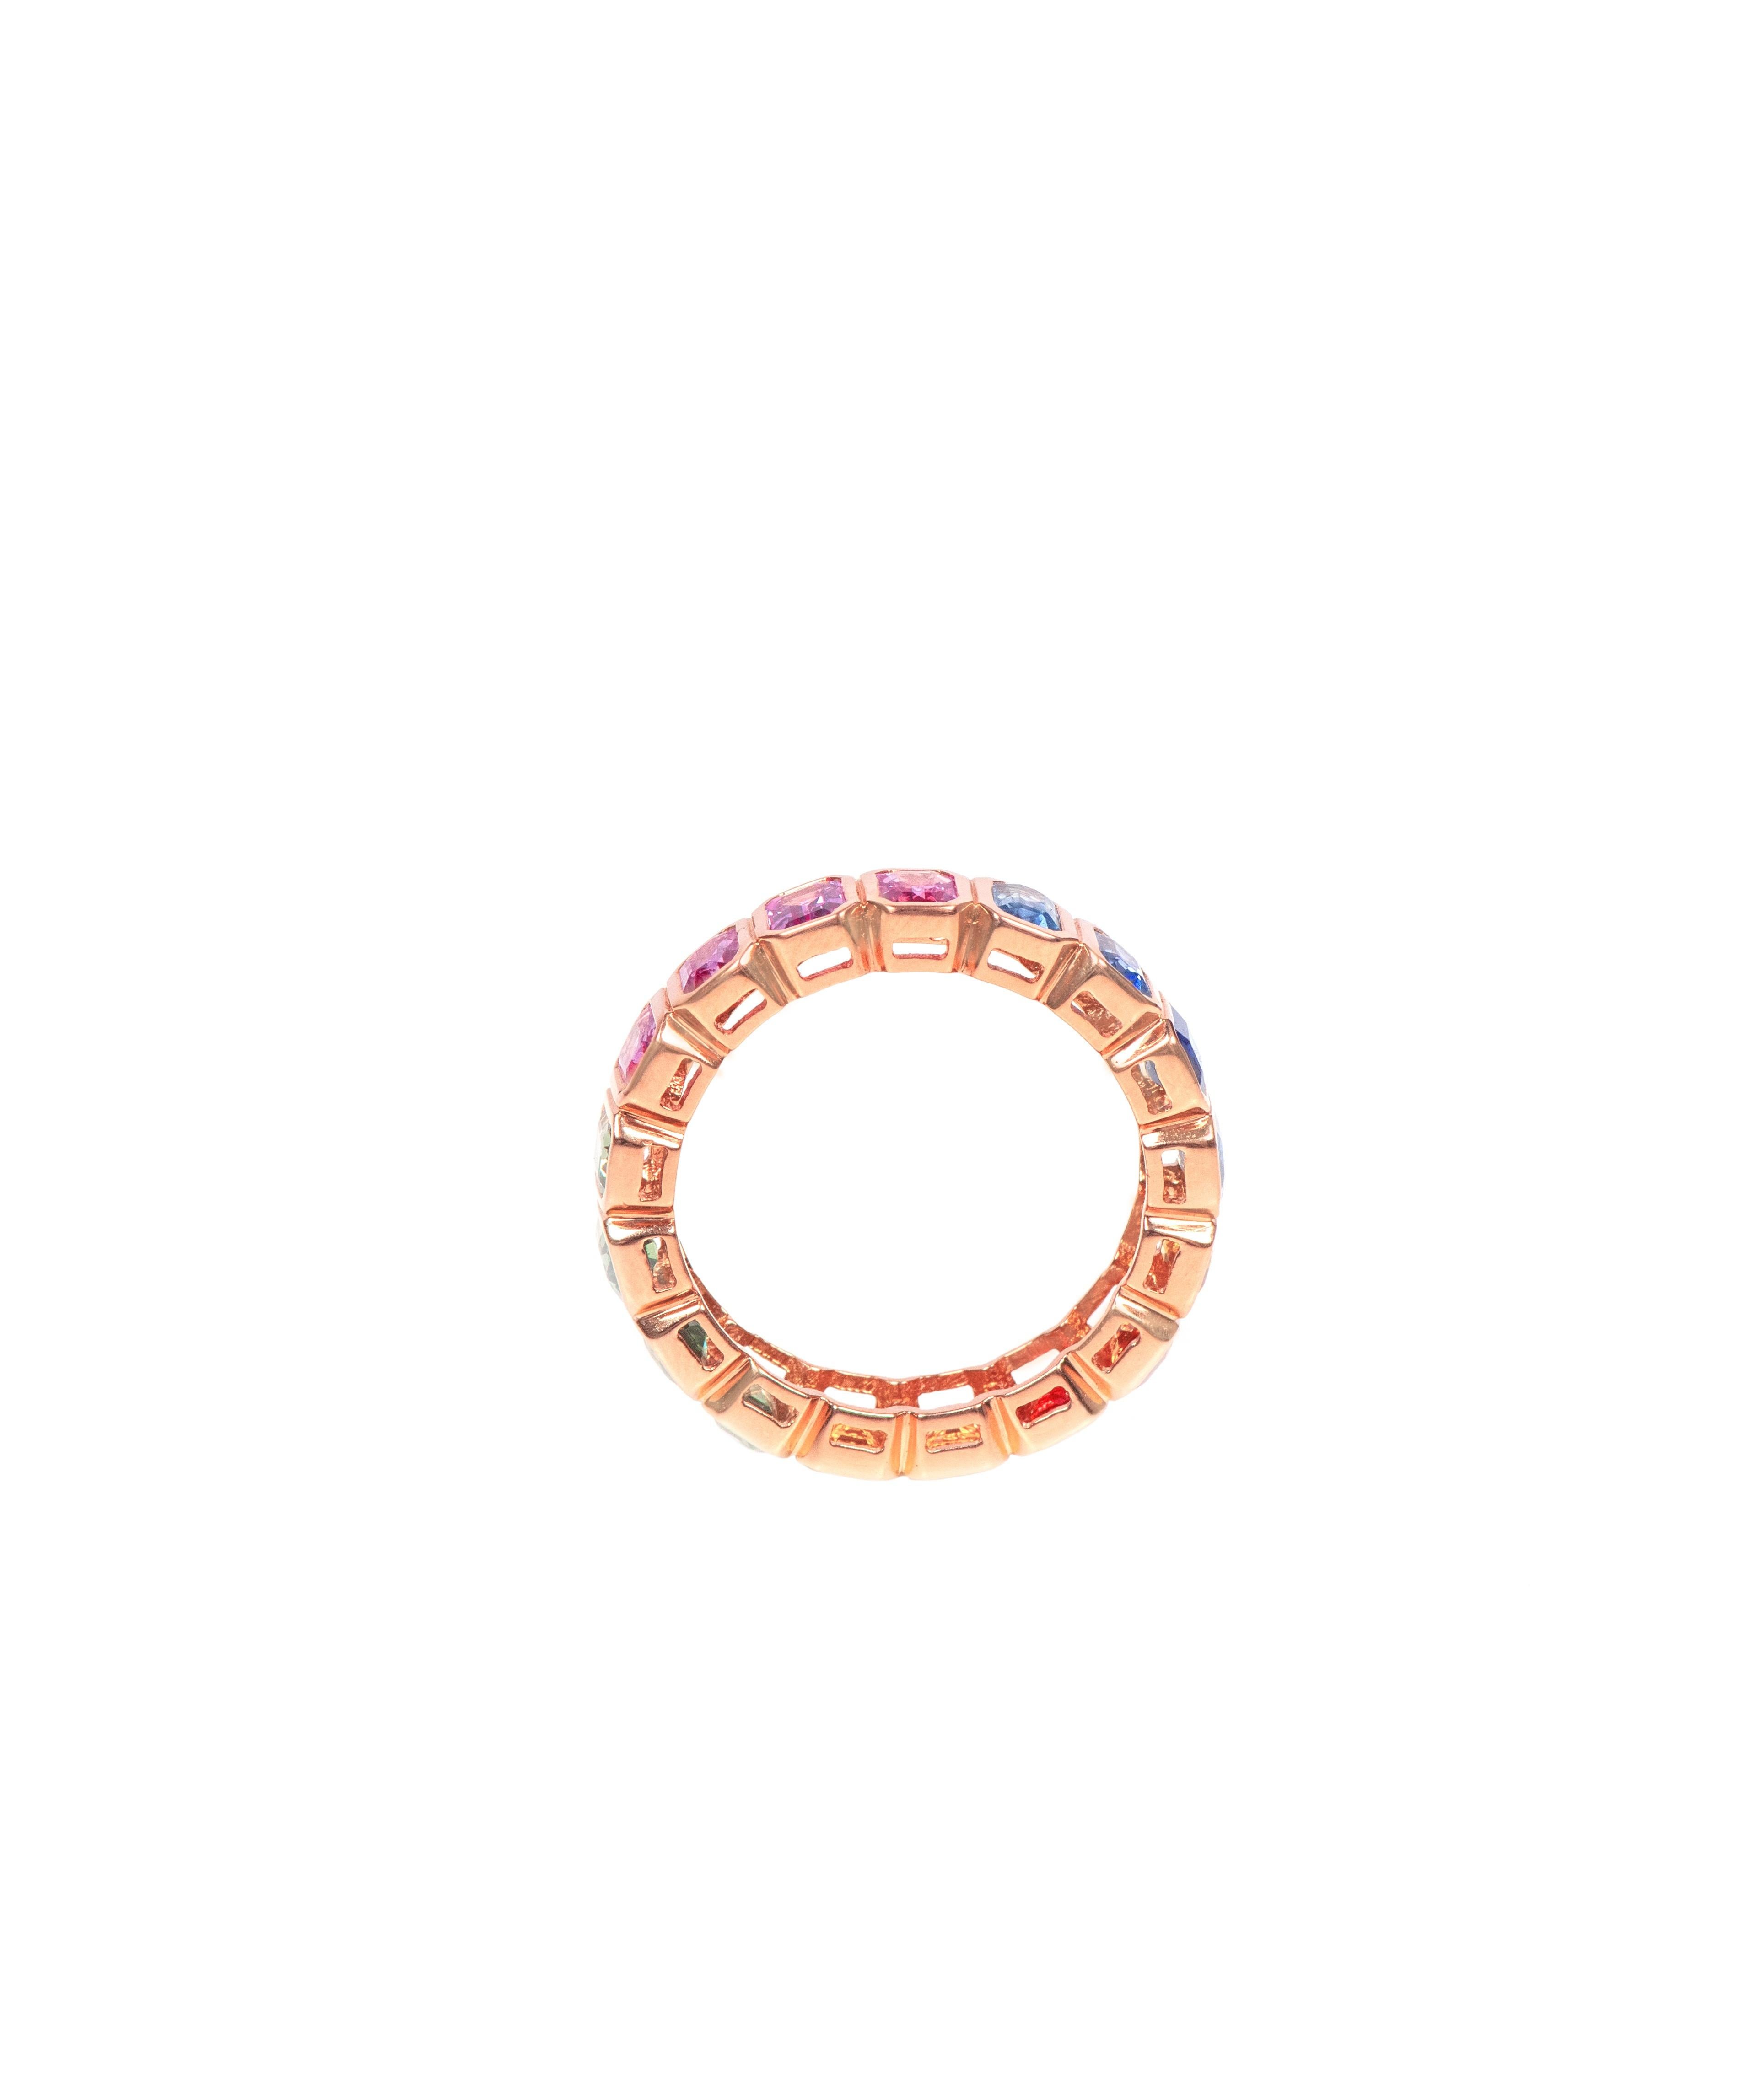 Indulge in the timeless beauty of our 18 Karat Gold 4.19 Carat Multi-Sapphire Eternity Band Ring. This exquisite ring is adorned with a mesmerizing array of multi-colored sapphires, totaling 4.19 carats, elegantly set in an eternity band design.